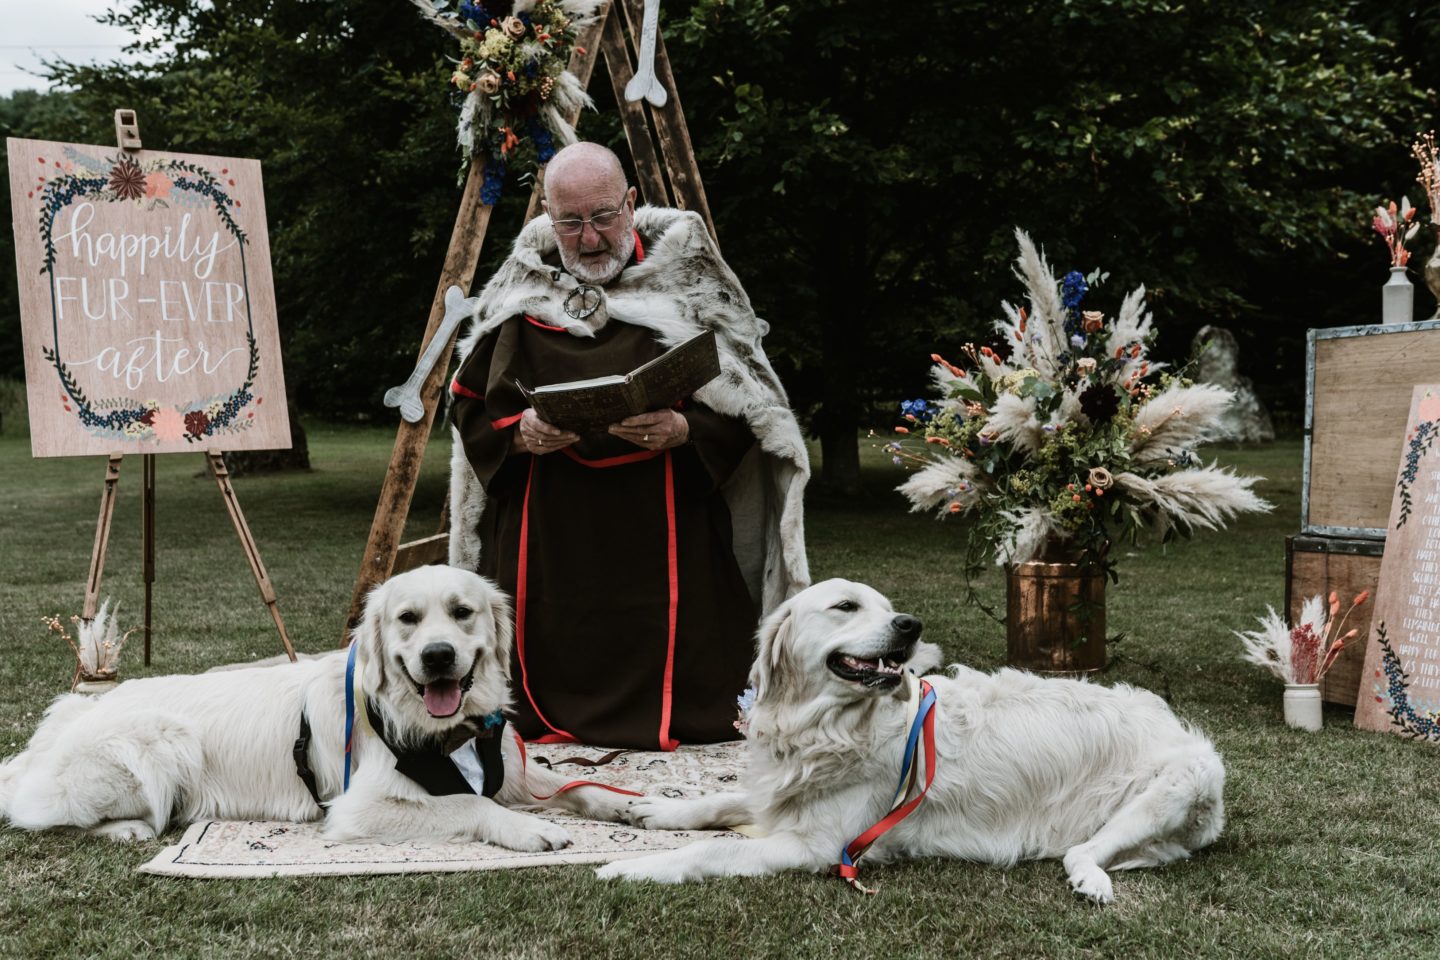 Dog Wedding With Doggy Ice Cream Reception at The Lost Village of Dode Kent